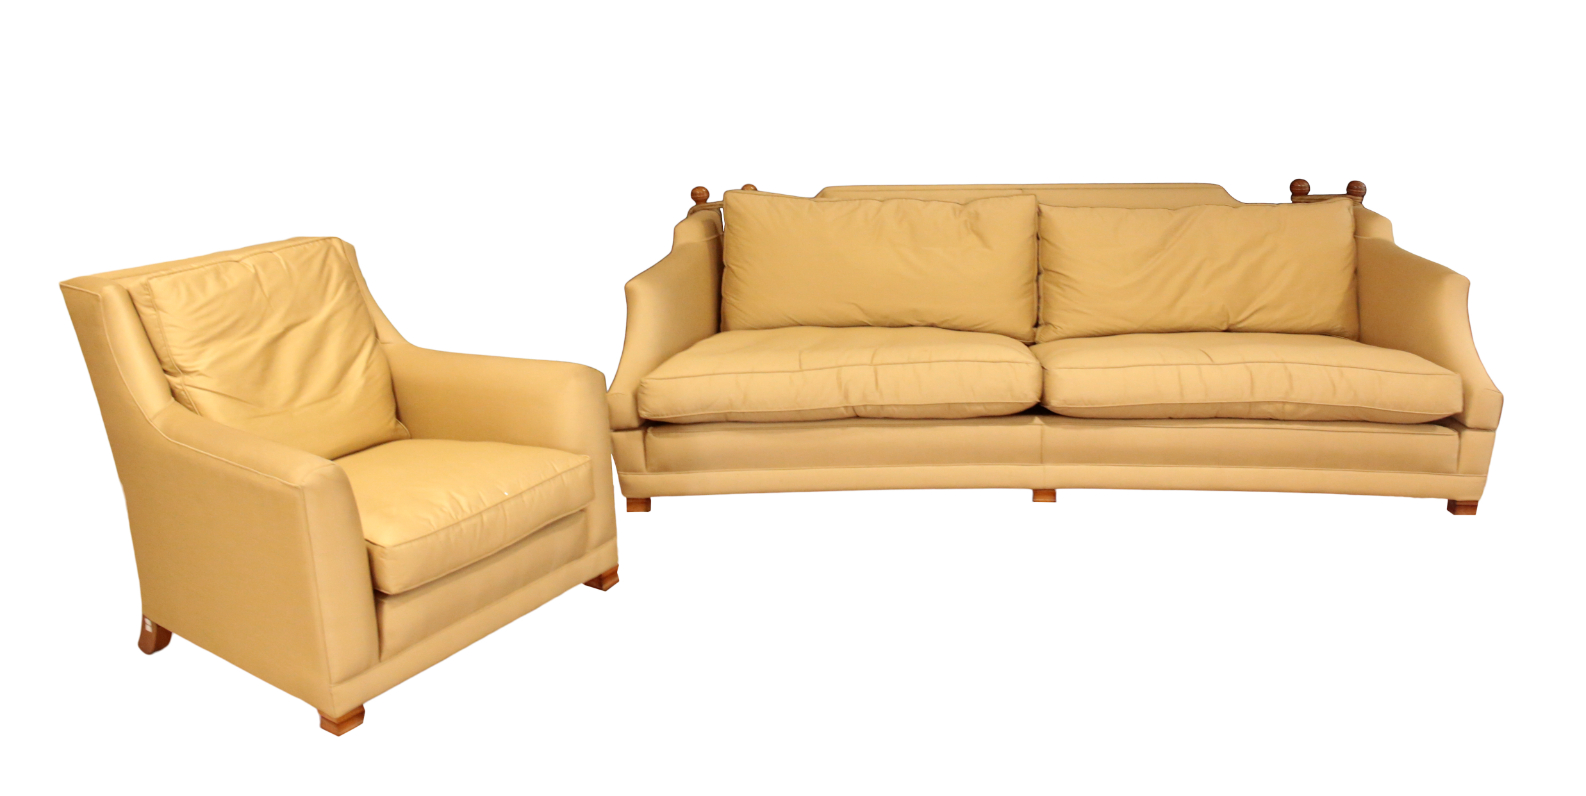 A KNOLE SOFA AND MATCHING CHAIR 3ae300